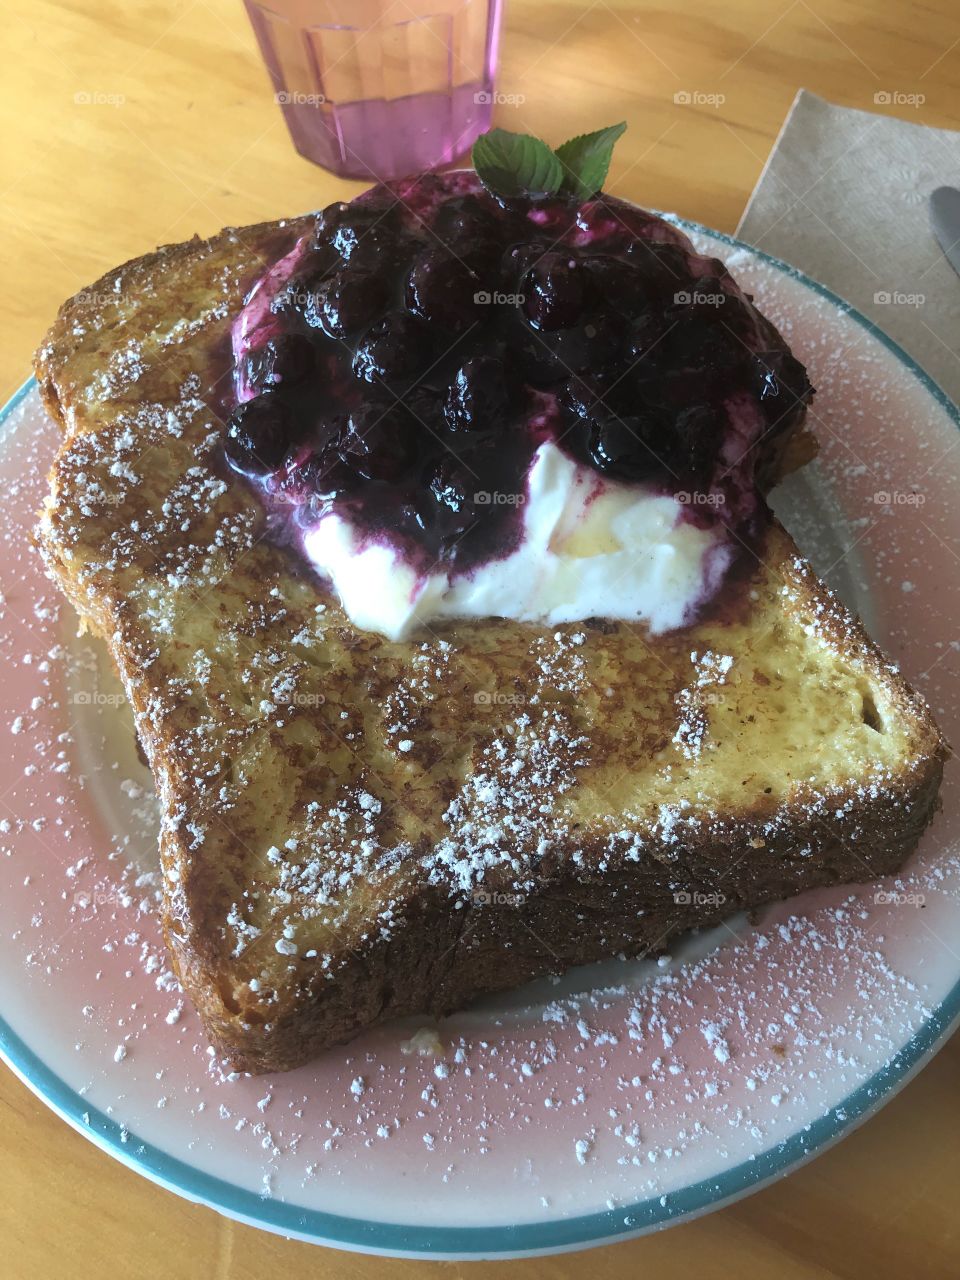 The best breakfasts are homemade in a little cafe in Columbus where all the ingredients are fresh! This French toast was out of this world!